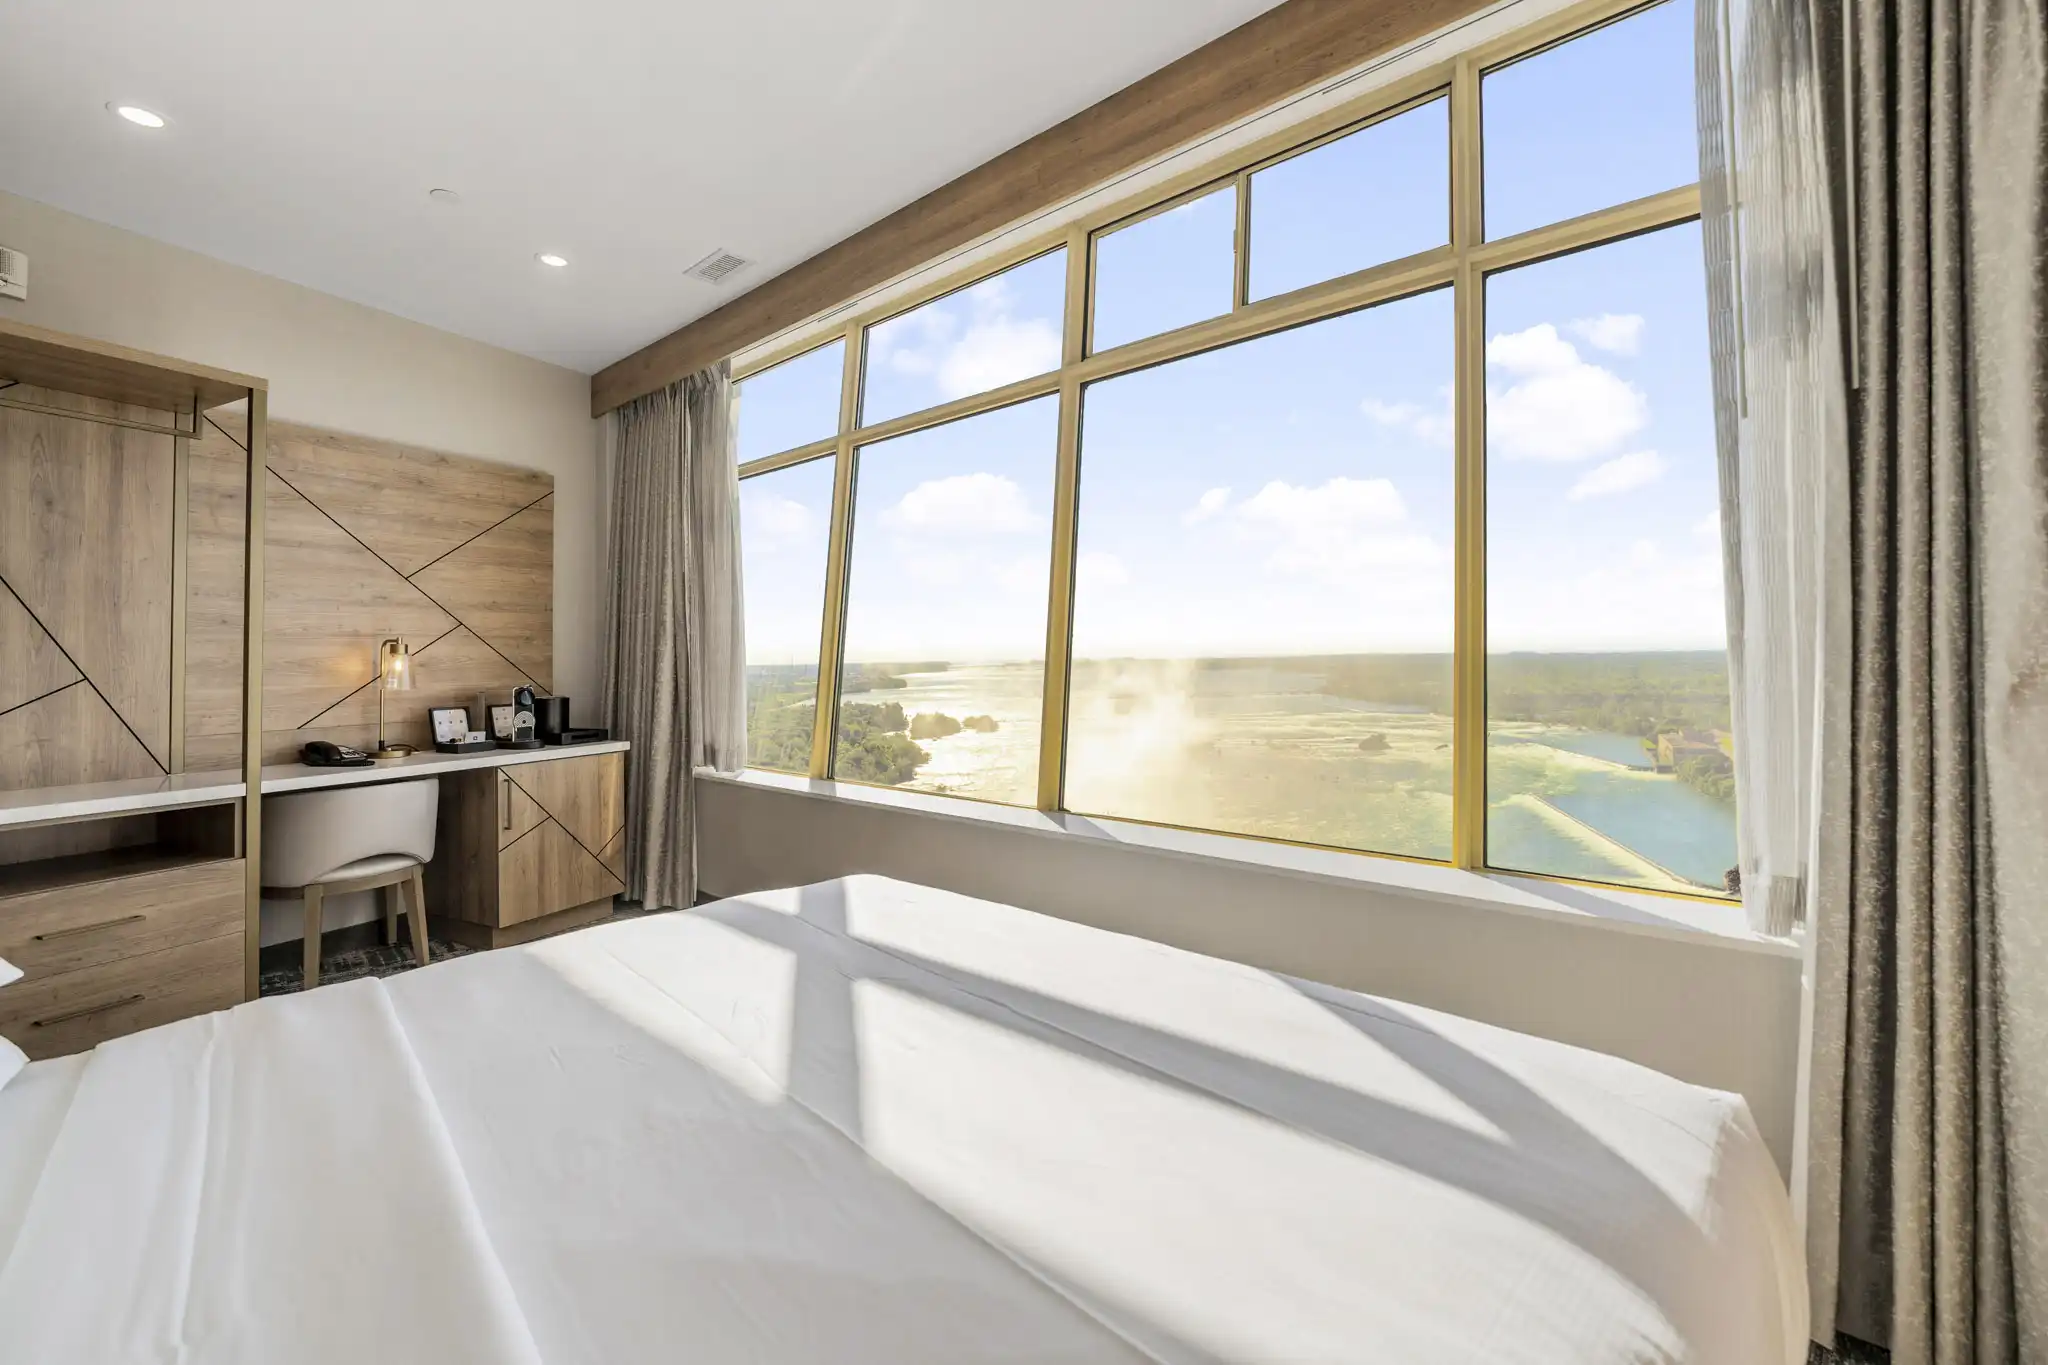 Hotel room with expansive window offering scenic view of Niagara Falls and Niagara river